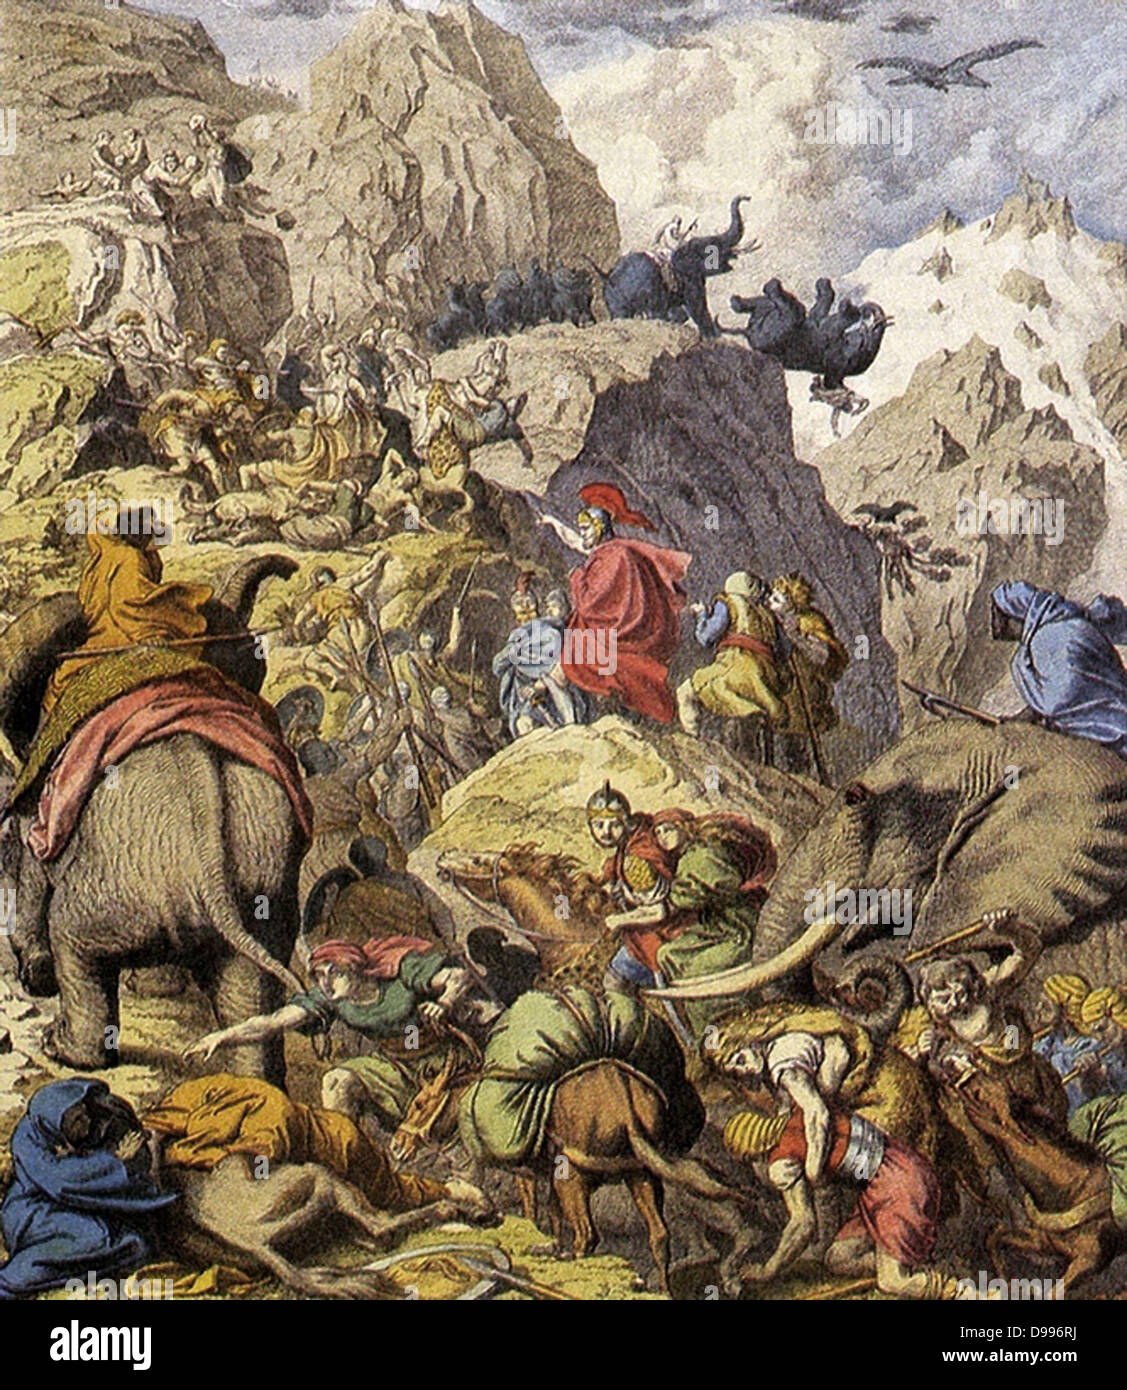 Hannibal crossing the Alps. Hannibal, (248–183 or 182 BC), Carthaginian military commander and tactician who is popularly credited as one of the most talented commanders in history.  Hannibal and his army crossed the Alps in 218 BCE in 16 days Stock Photo